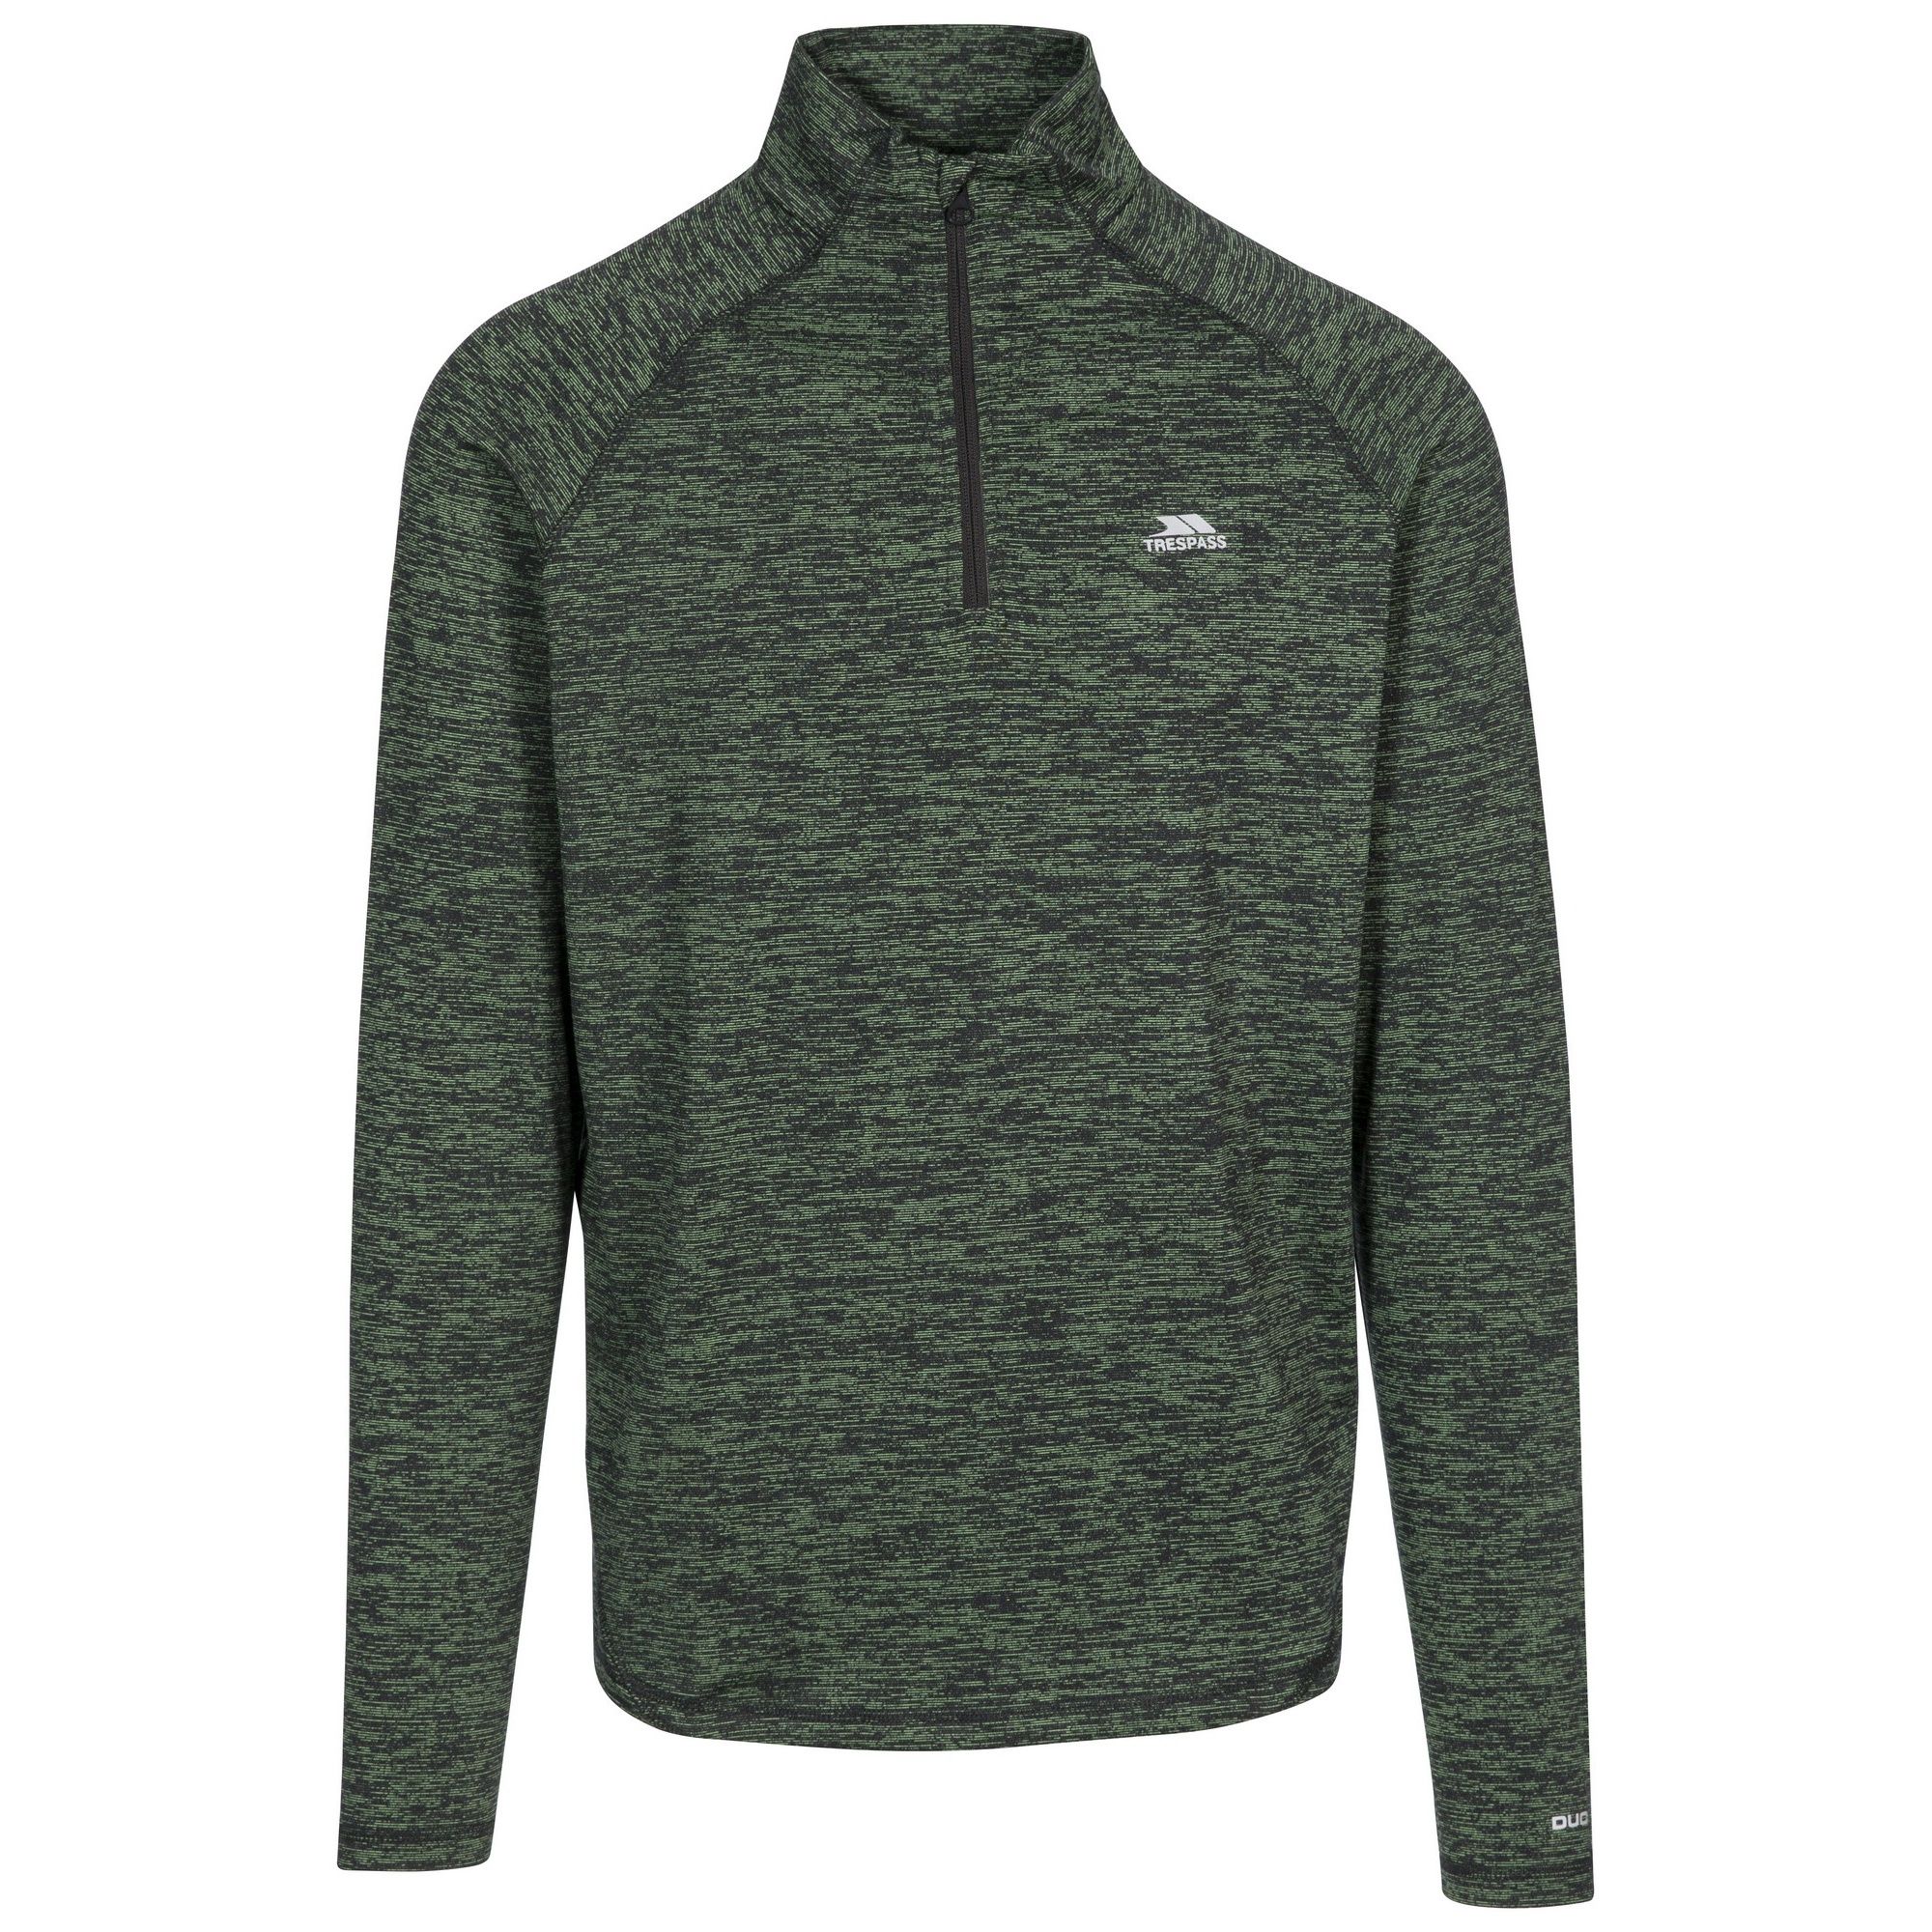 1/2 zip. Long sleeve. Contrast back neck binding. Reflective printed logos and trims. Wicking. Quick dry. 88% Polyester. 12% Elastane. Trespass Mens Chest Sizing (approx): S - 35-37in/89-94cm, M - 38-40in/96.5-101.5cm, L - 41-43in/104-109cm, XL - 44-46in/111.5-117cm, XXL - 46-48in/117-122cm, 3XL - 48-50in/122-127cm.